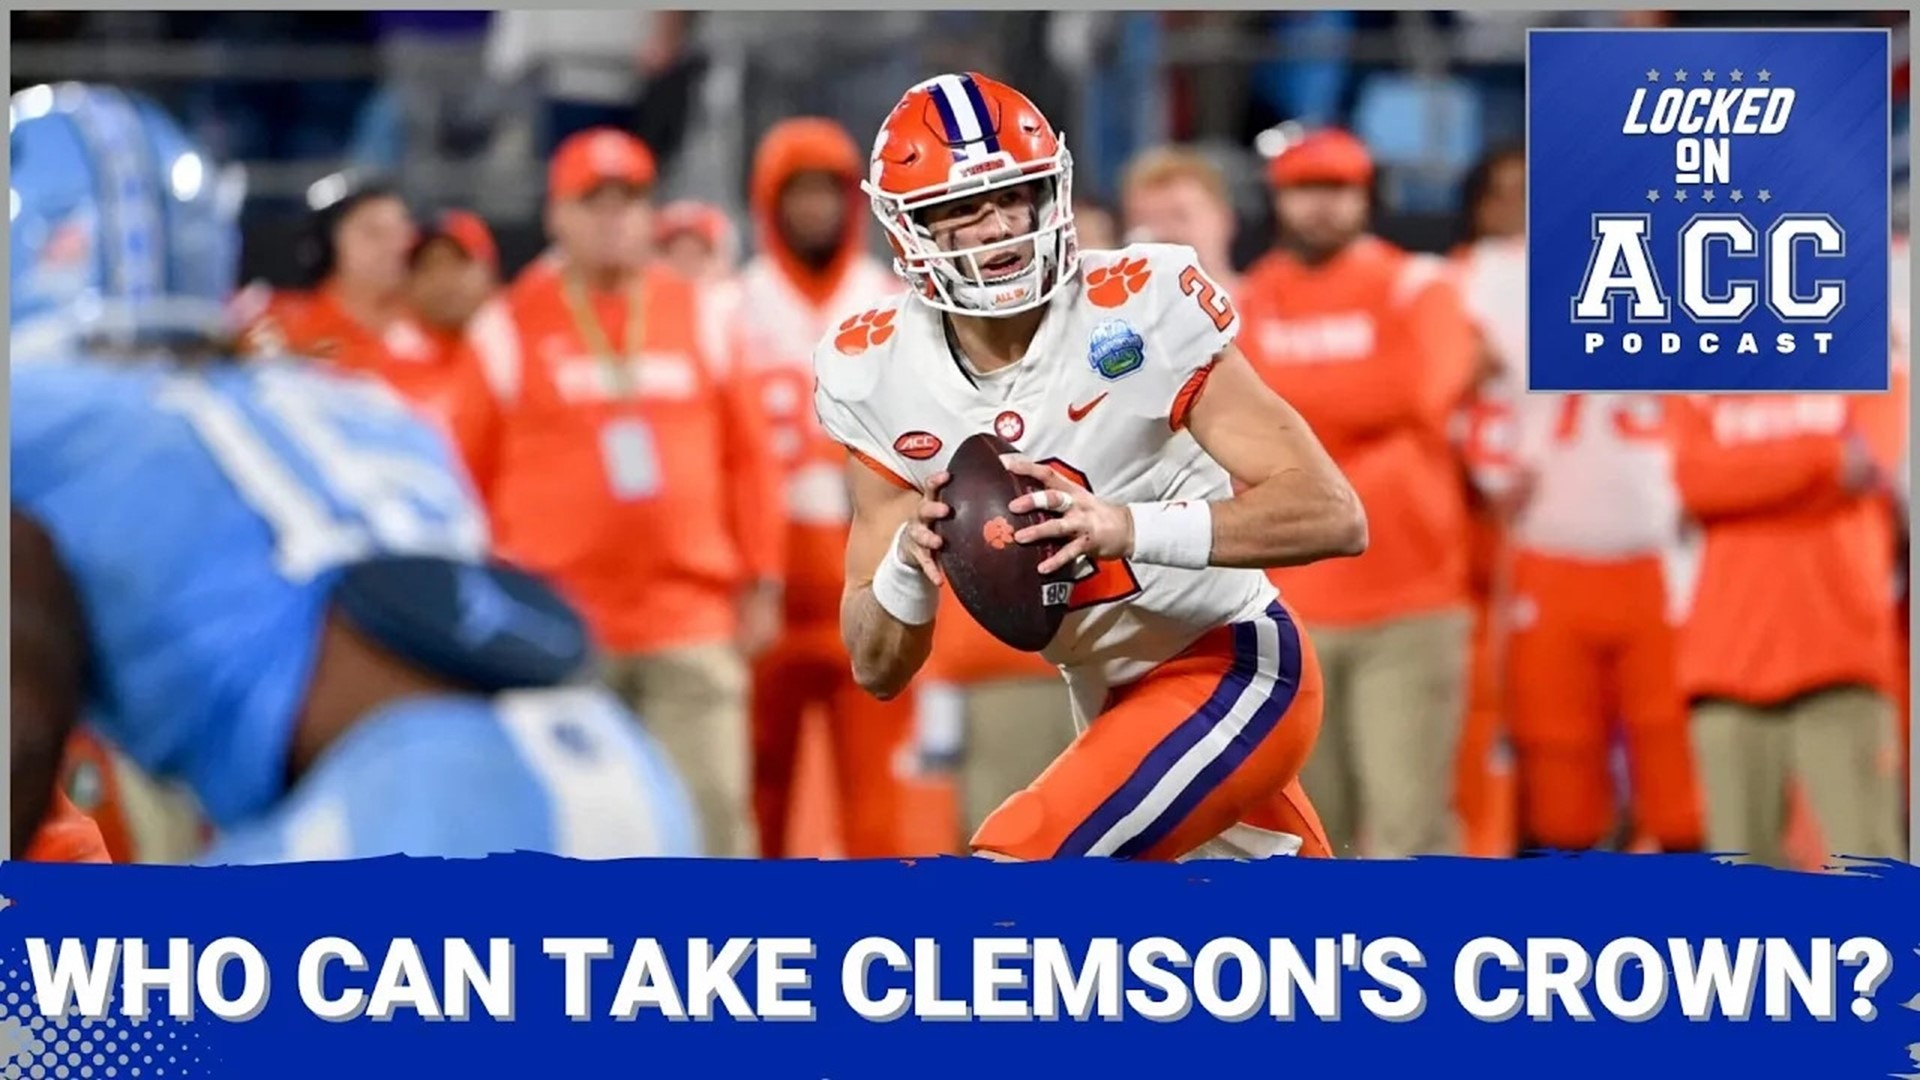 Now the DJU is gone, can Clemson get back to College Football Playoff form? What will be the excuse if it doesn't work out for them this year?